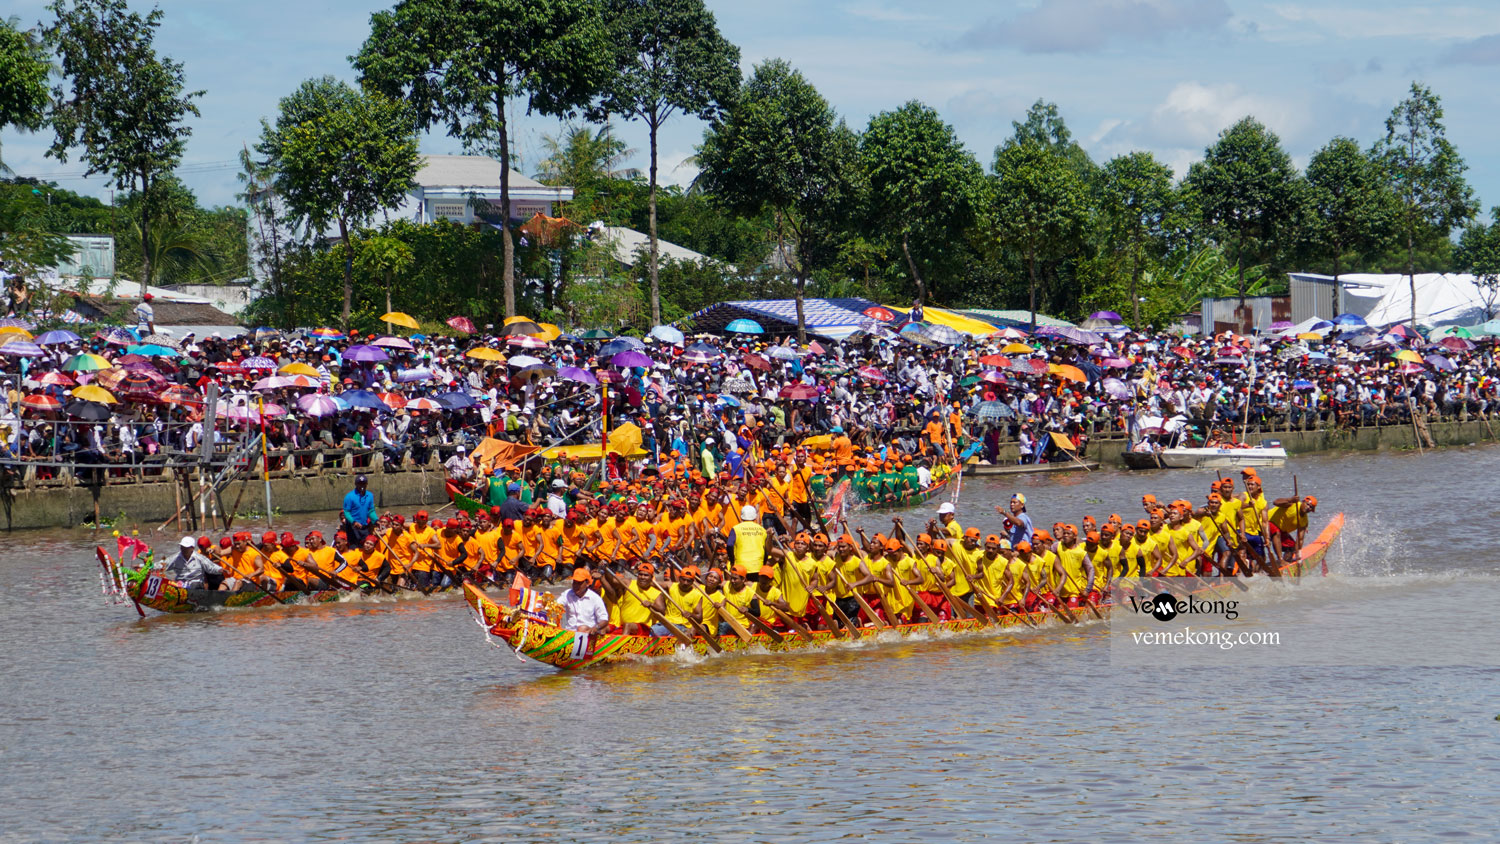 Ghe Ngo Boat Race Festival - A Must-See Soc Trang Festival